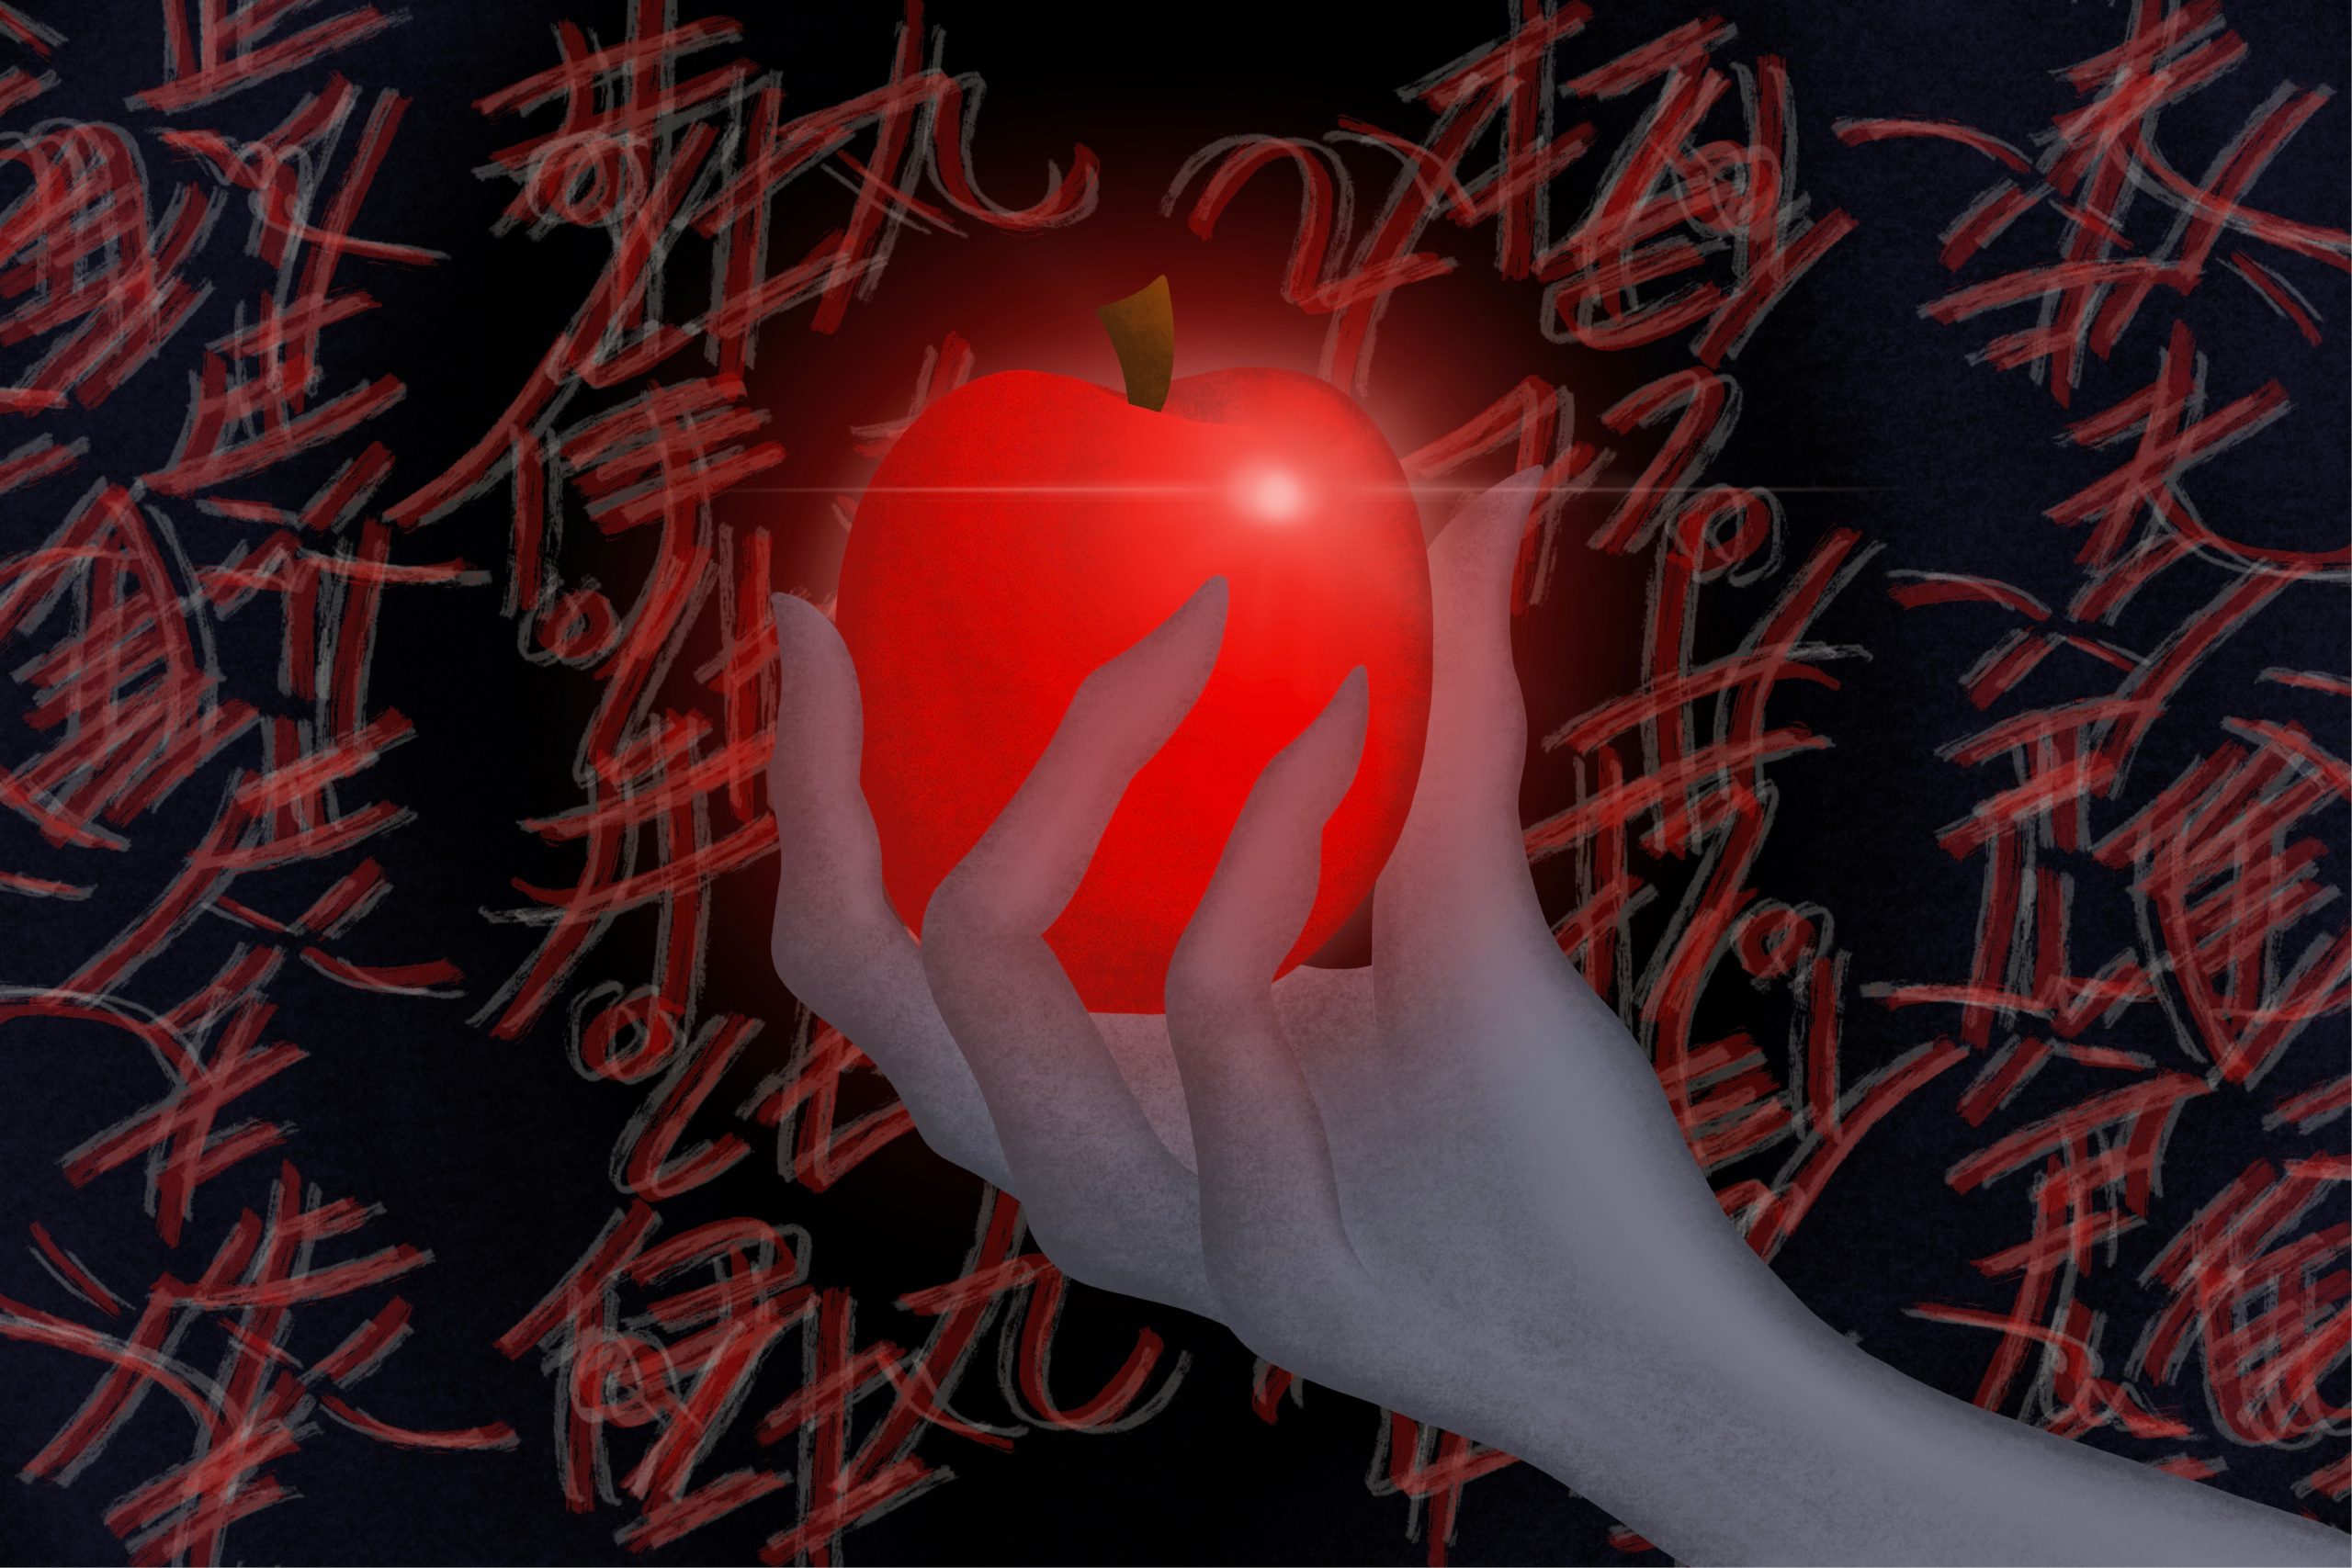 A creepy cartoon hand holding apple on a black background with some Japanese text written on it